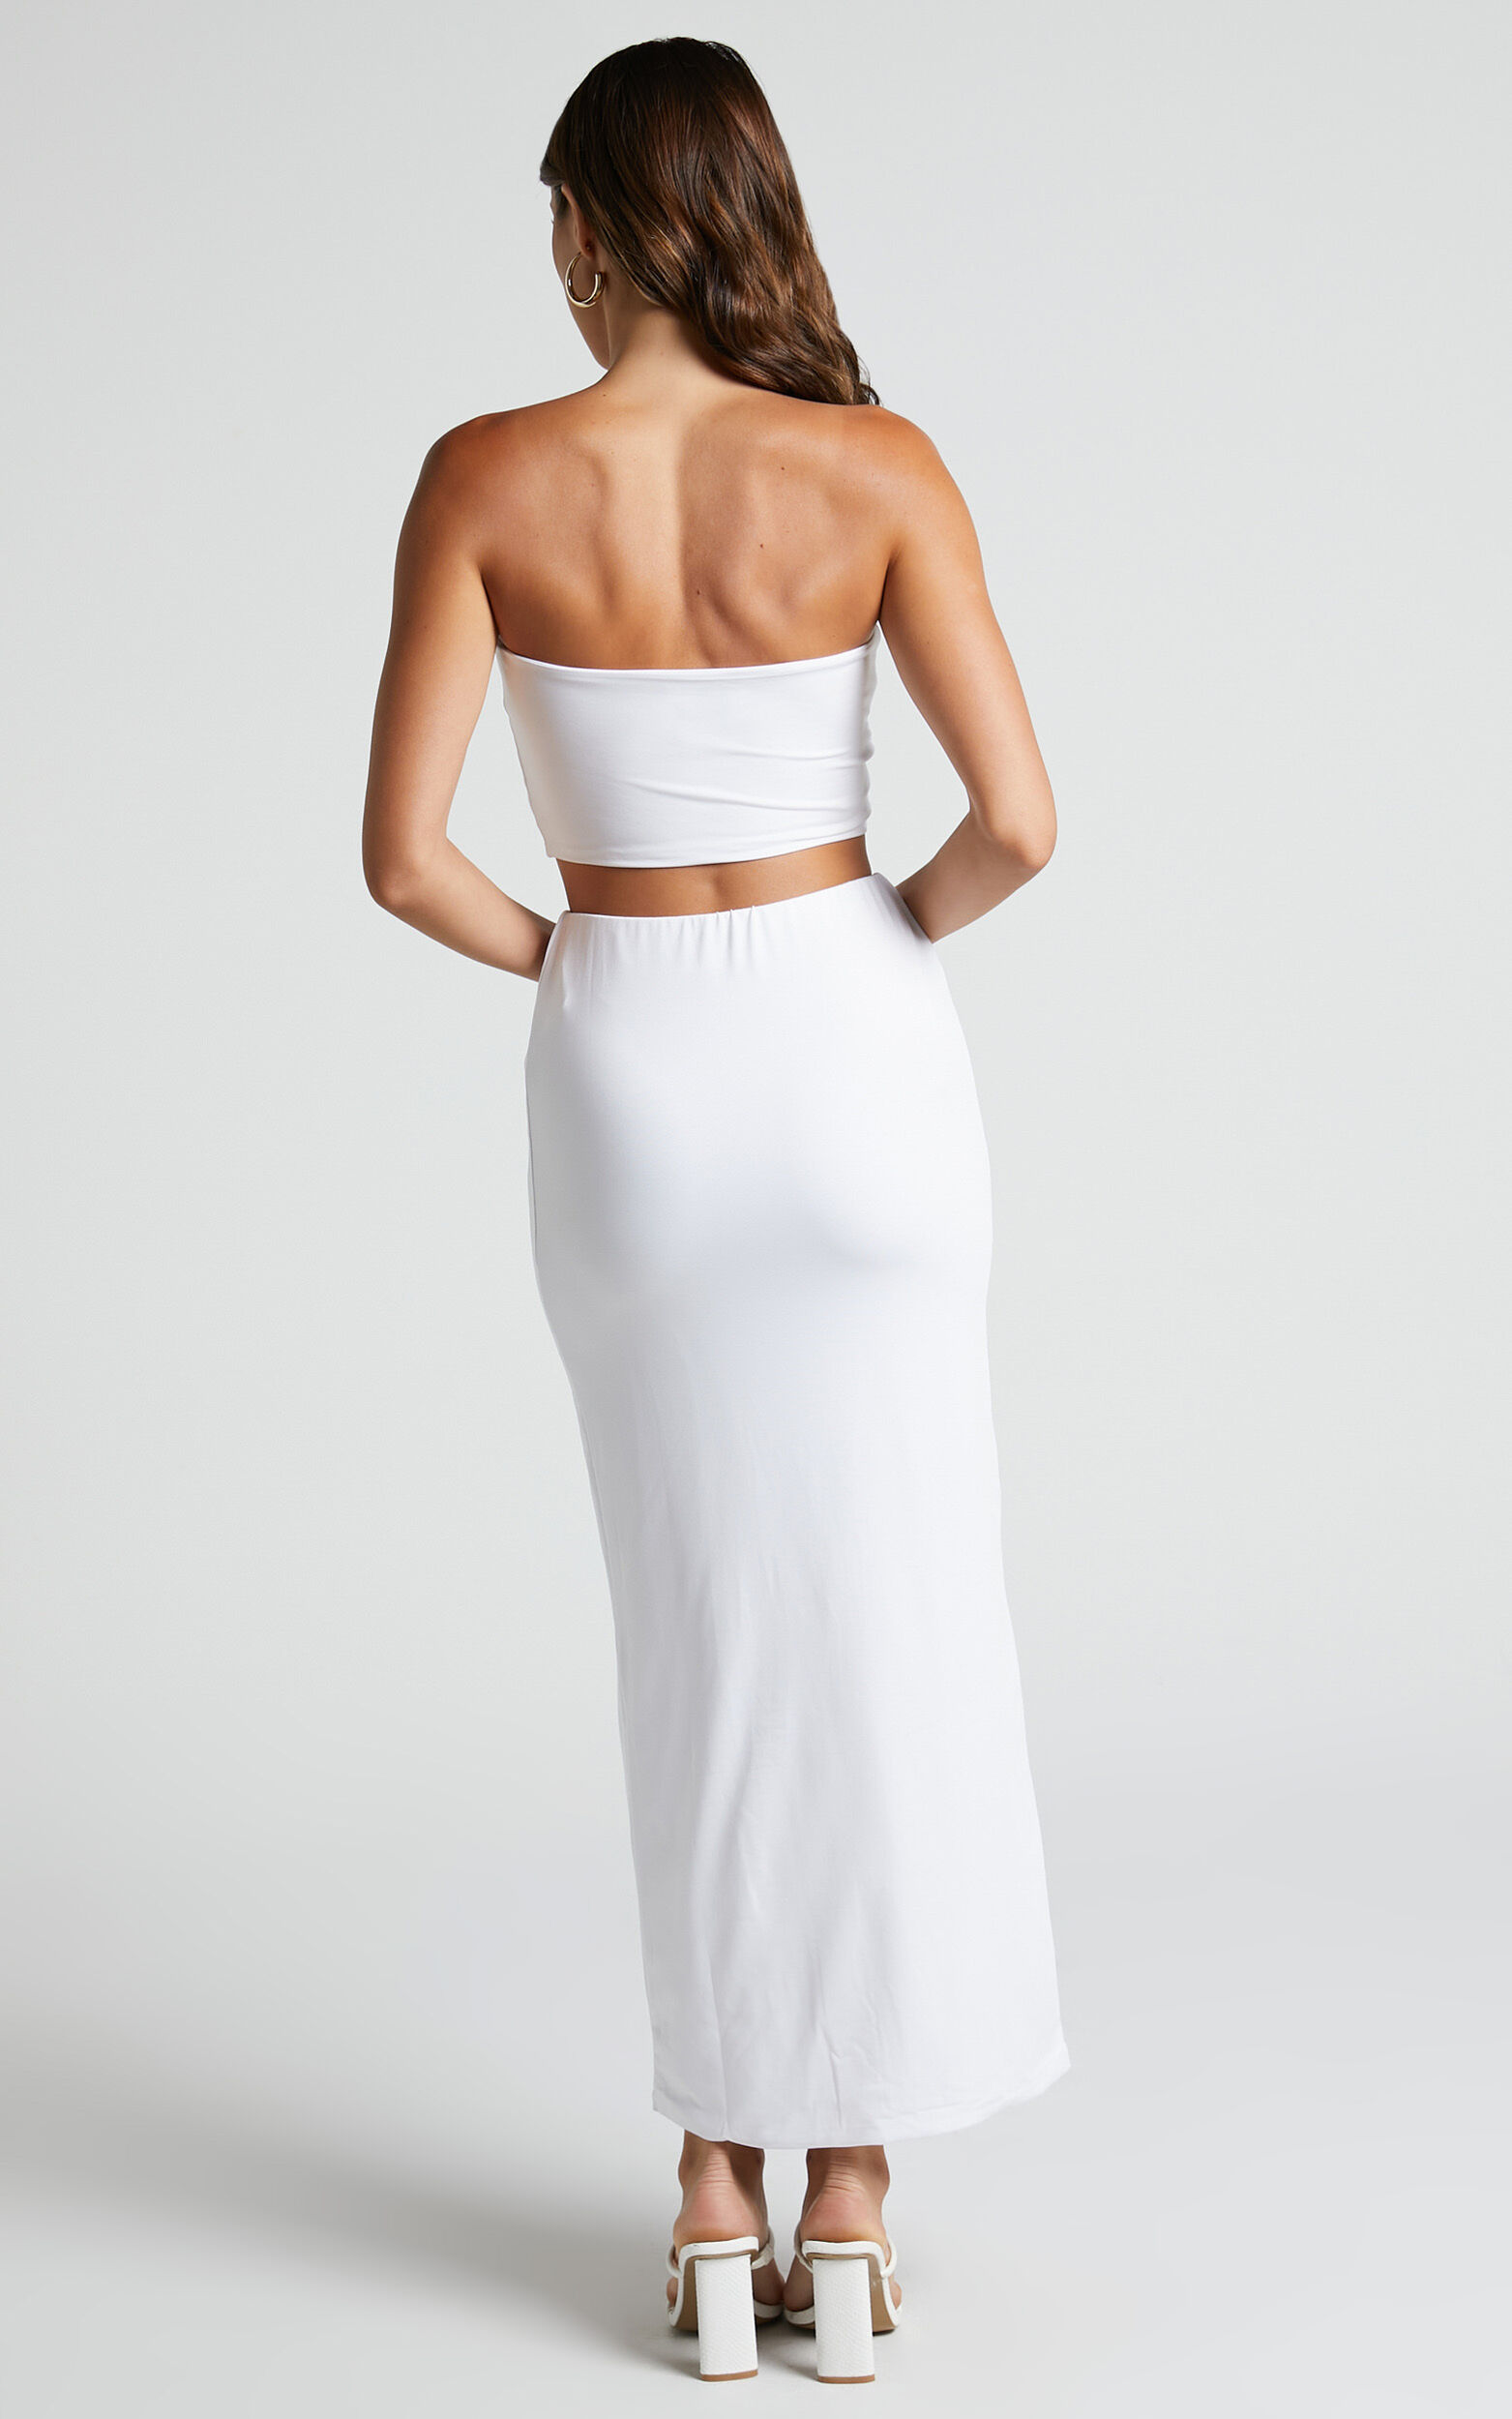 Alexavia Two Piece Set - Strapless Bandeau Top and Maxi Skirt in